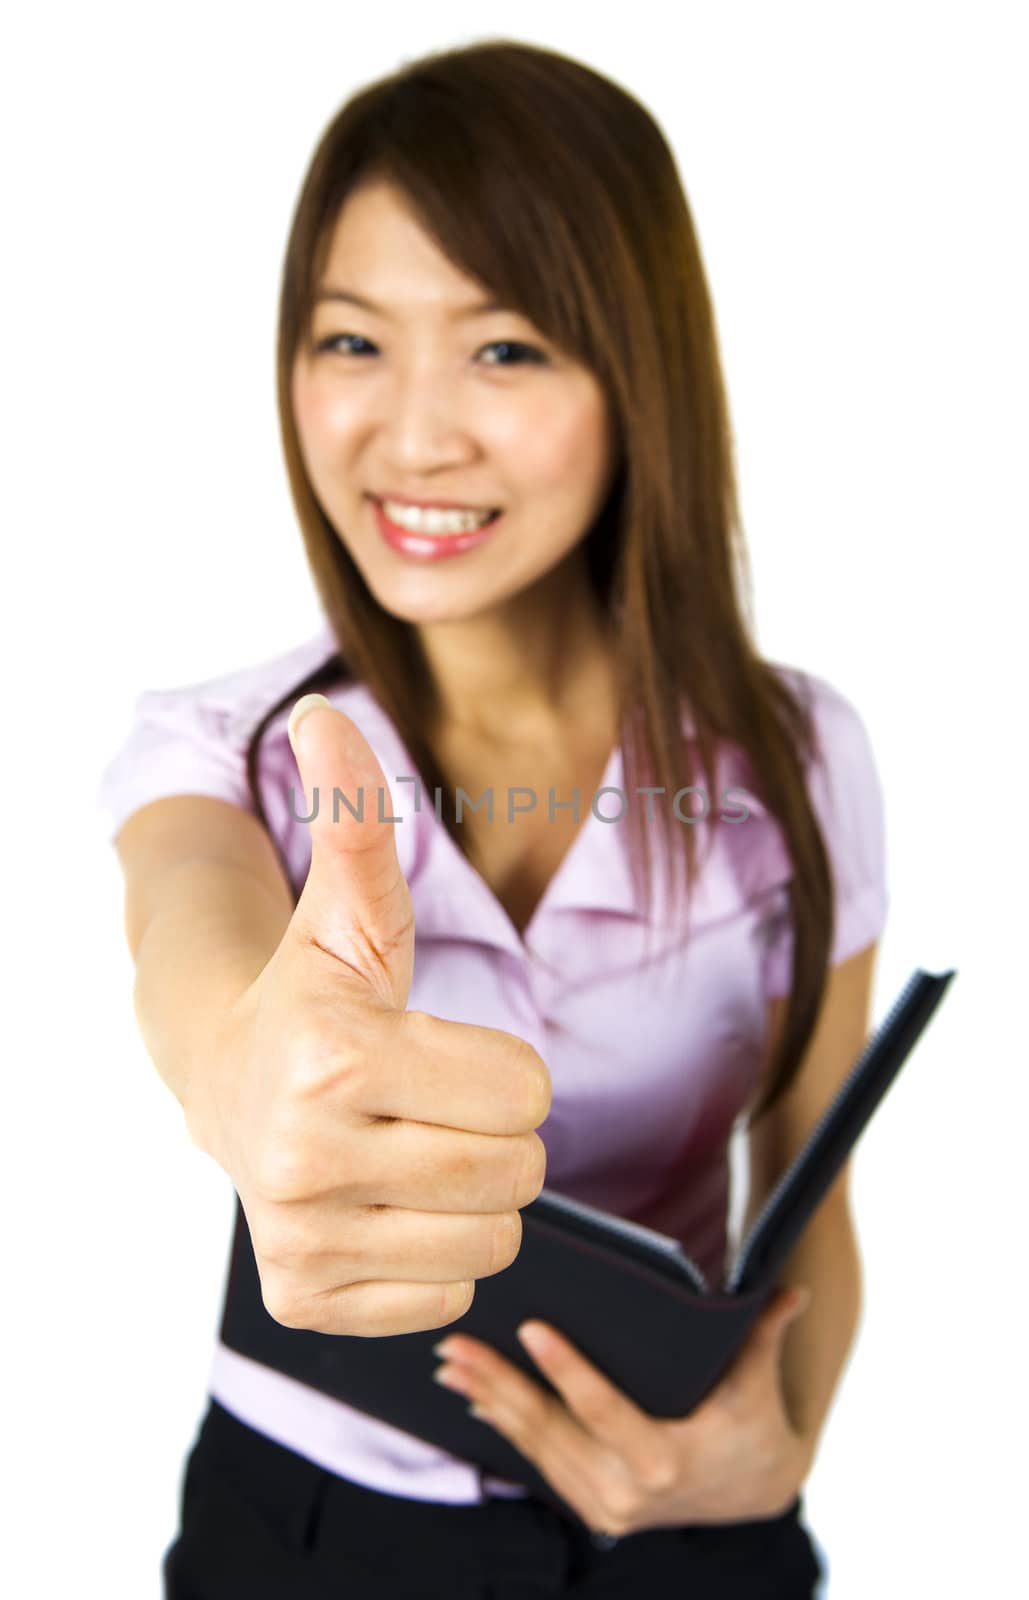 An Asian girl giving thumbs up sign and holding a file isolated on white.